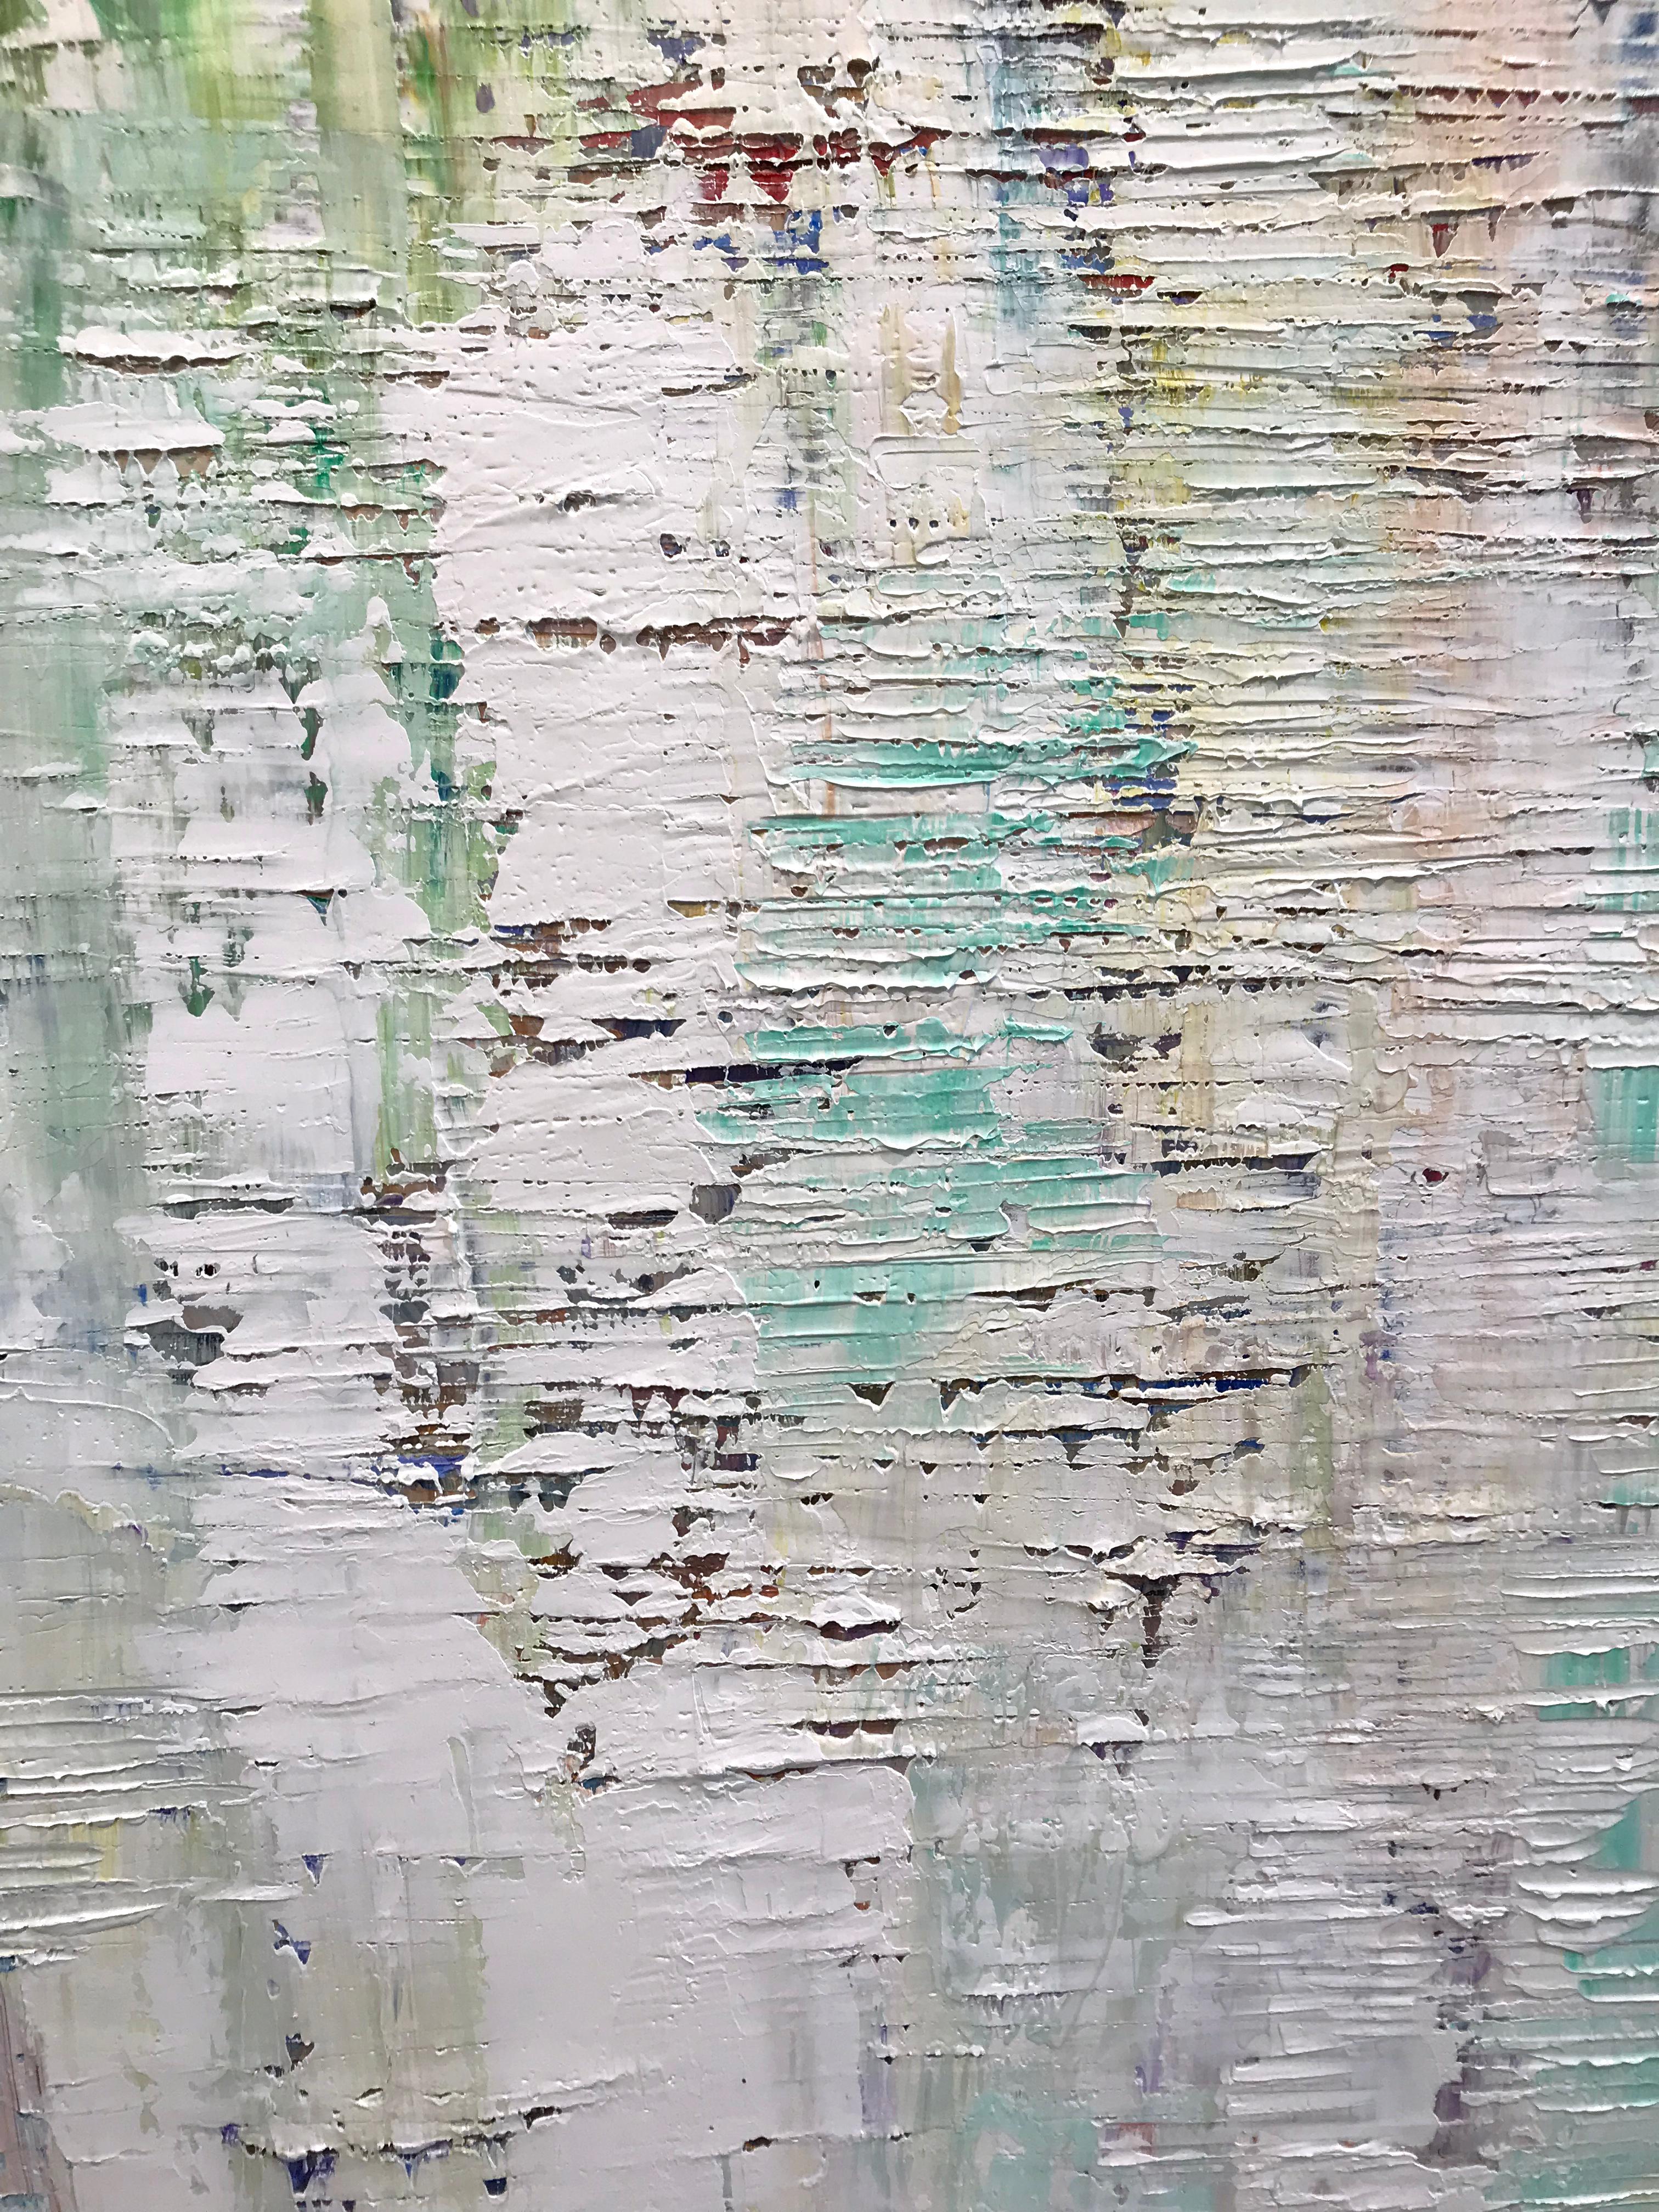 After the Rain is a contemporary abstract oil painting by artist Julia S. Powell. In this painting, bright shades of blue, aqua, pink, green, and navy are masked by a layer of white paint. Powell uses horizontal brush strokes throughout the piece to